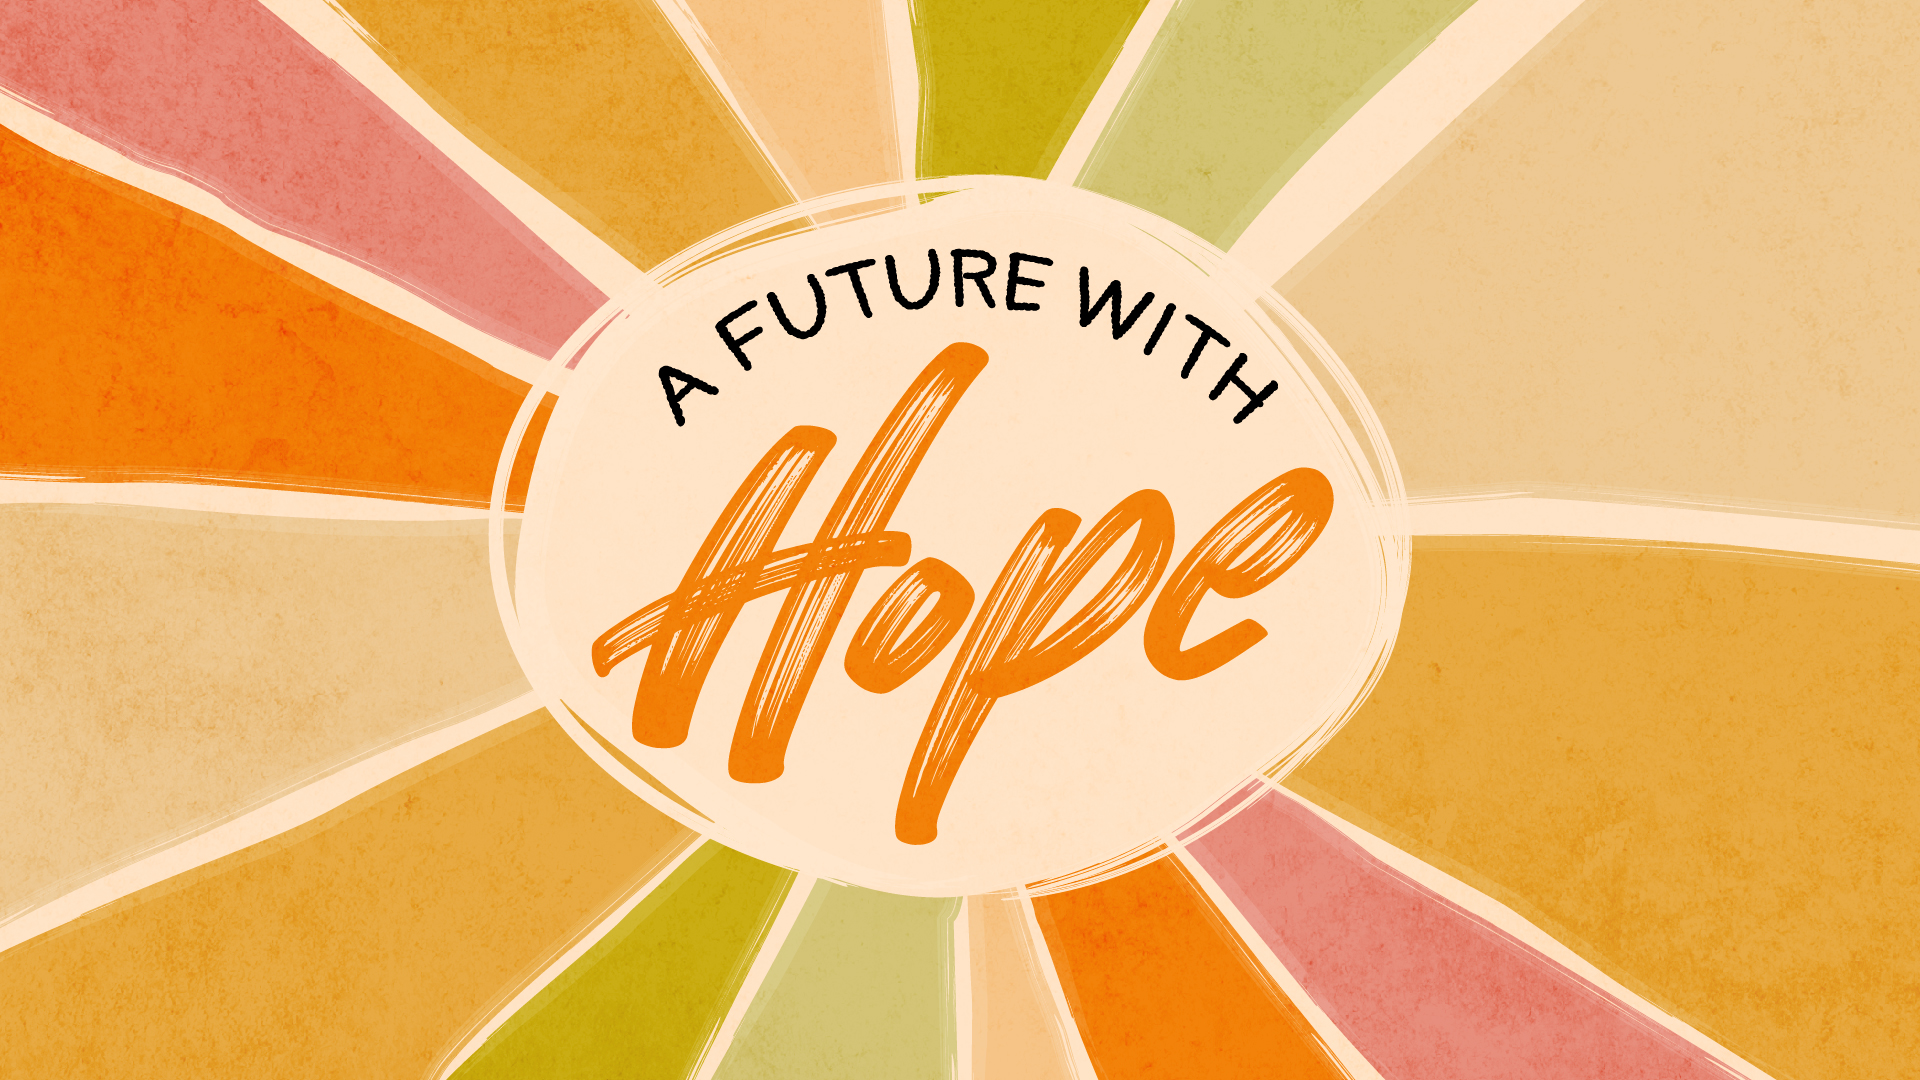 Perceiving a Future With Hope